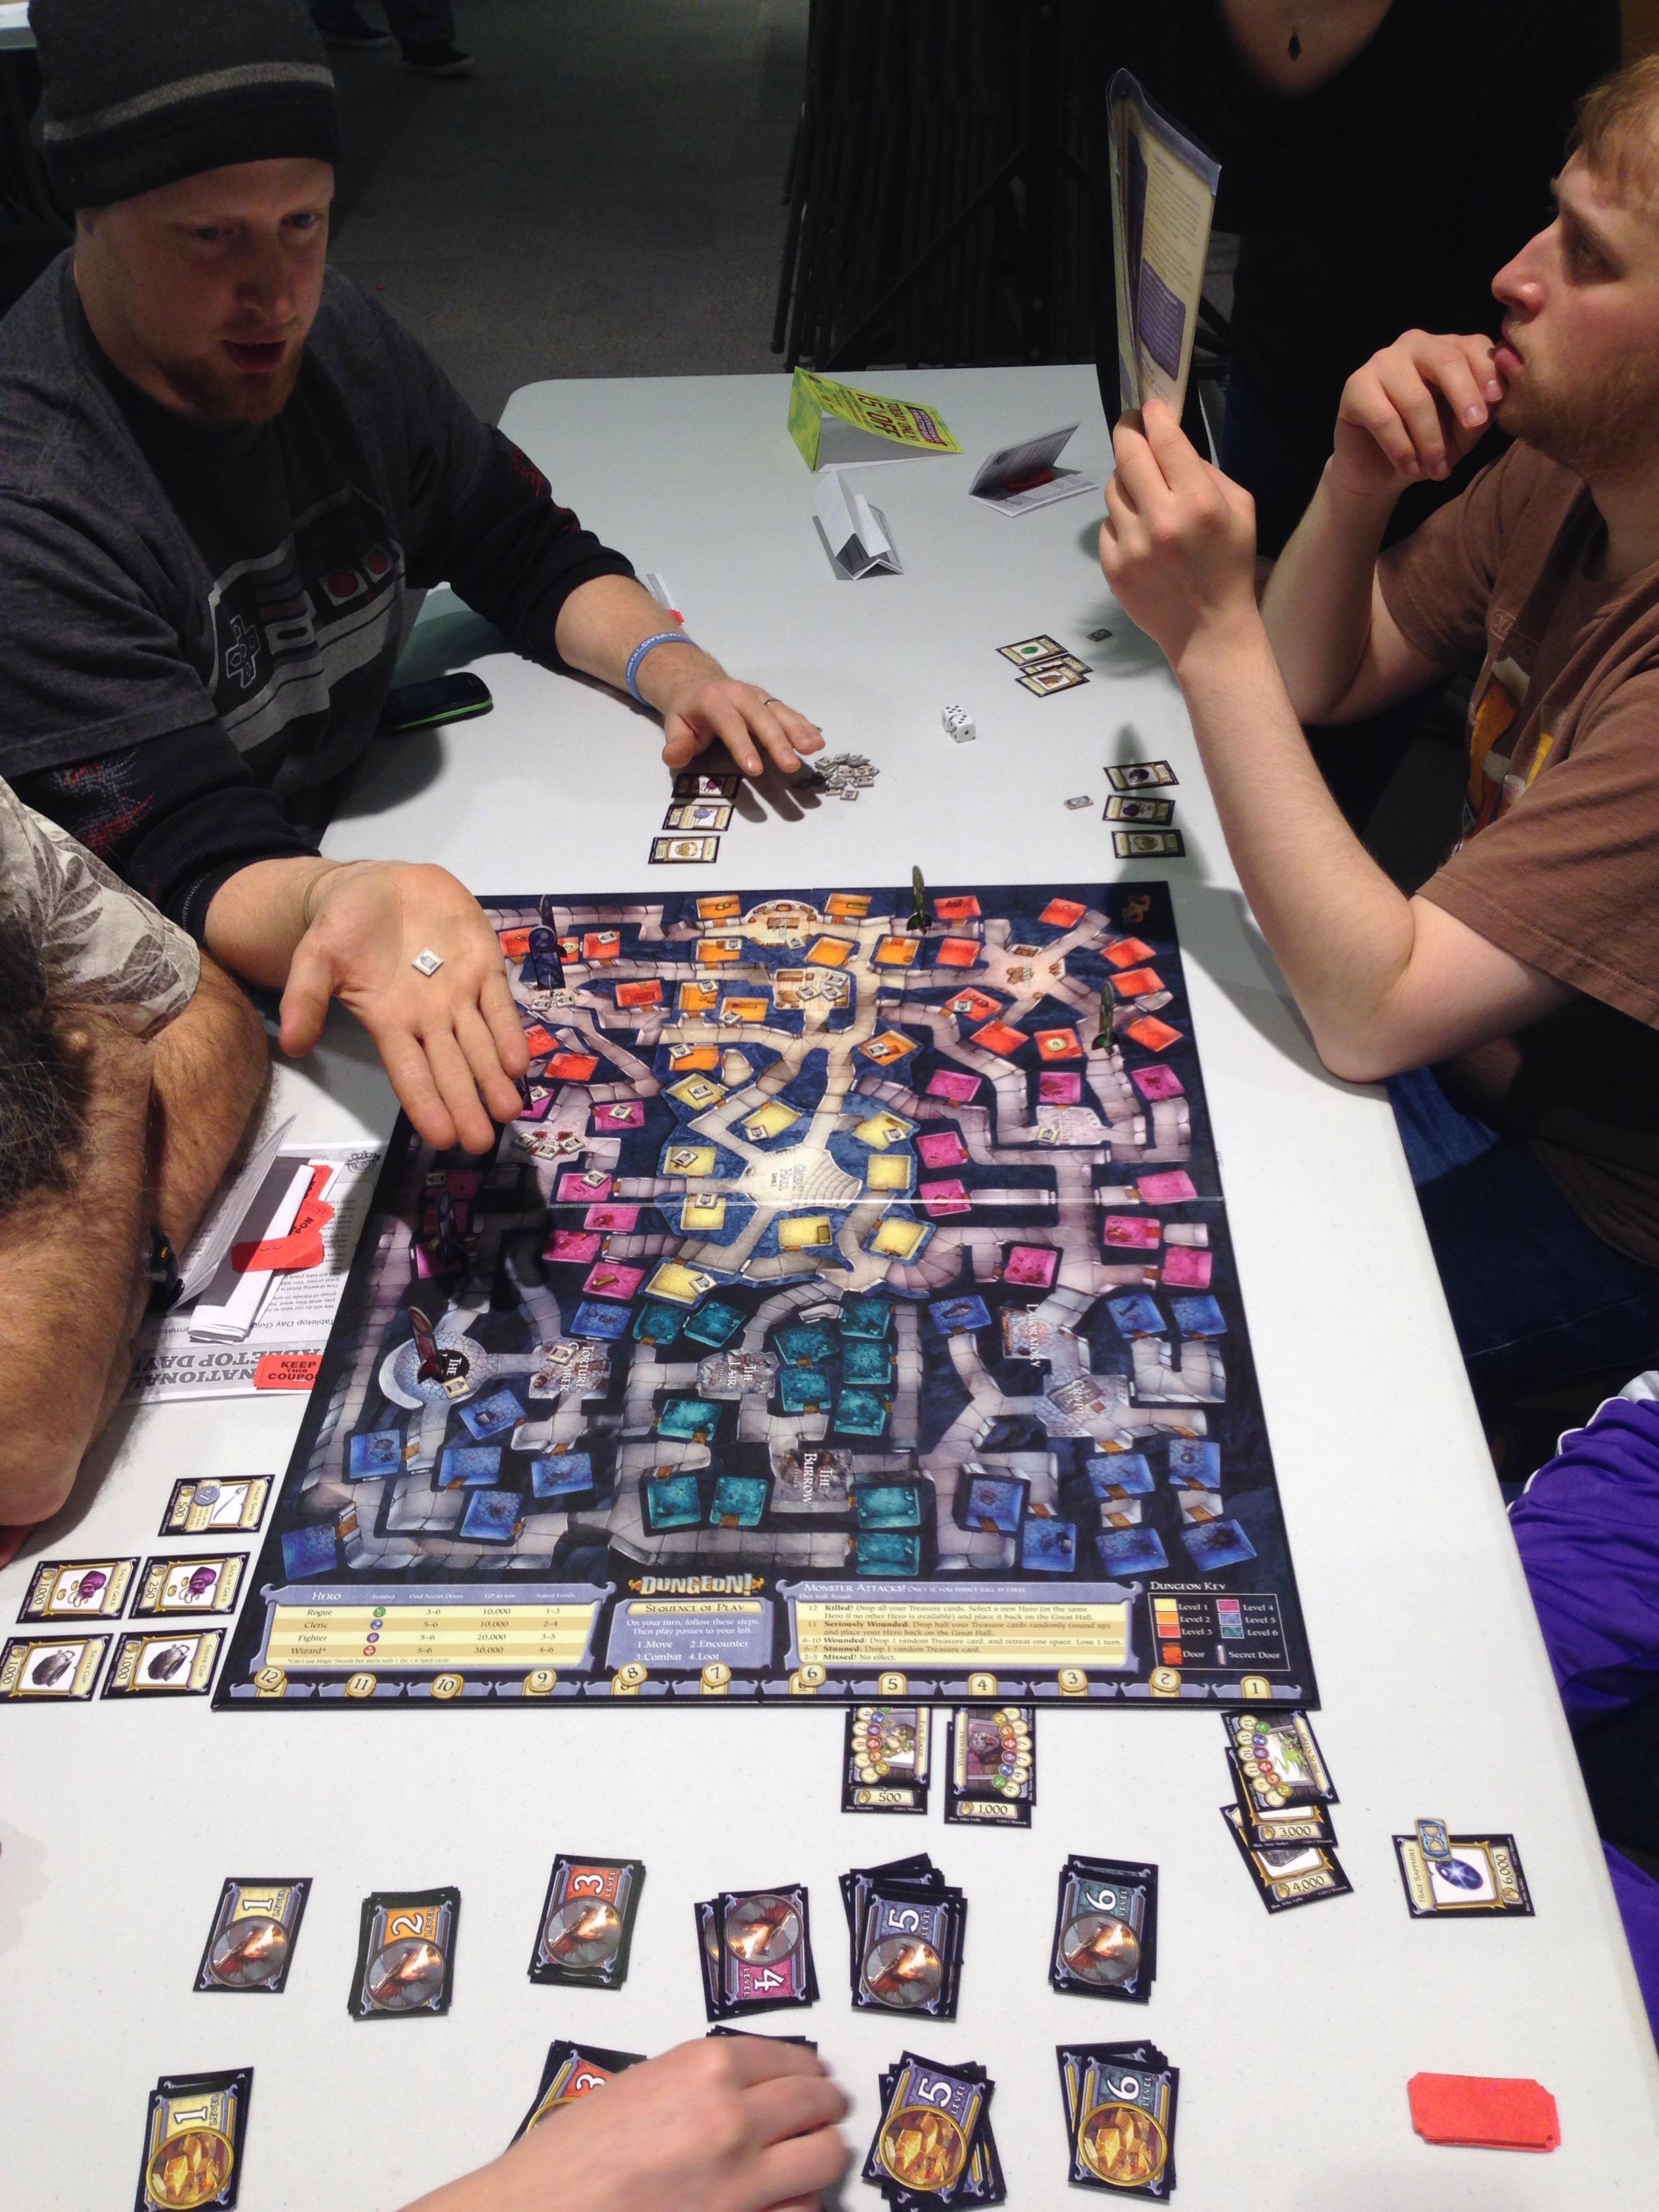 The last game of the day was probably the oldest game of the day, albeit a new edition